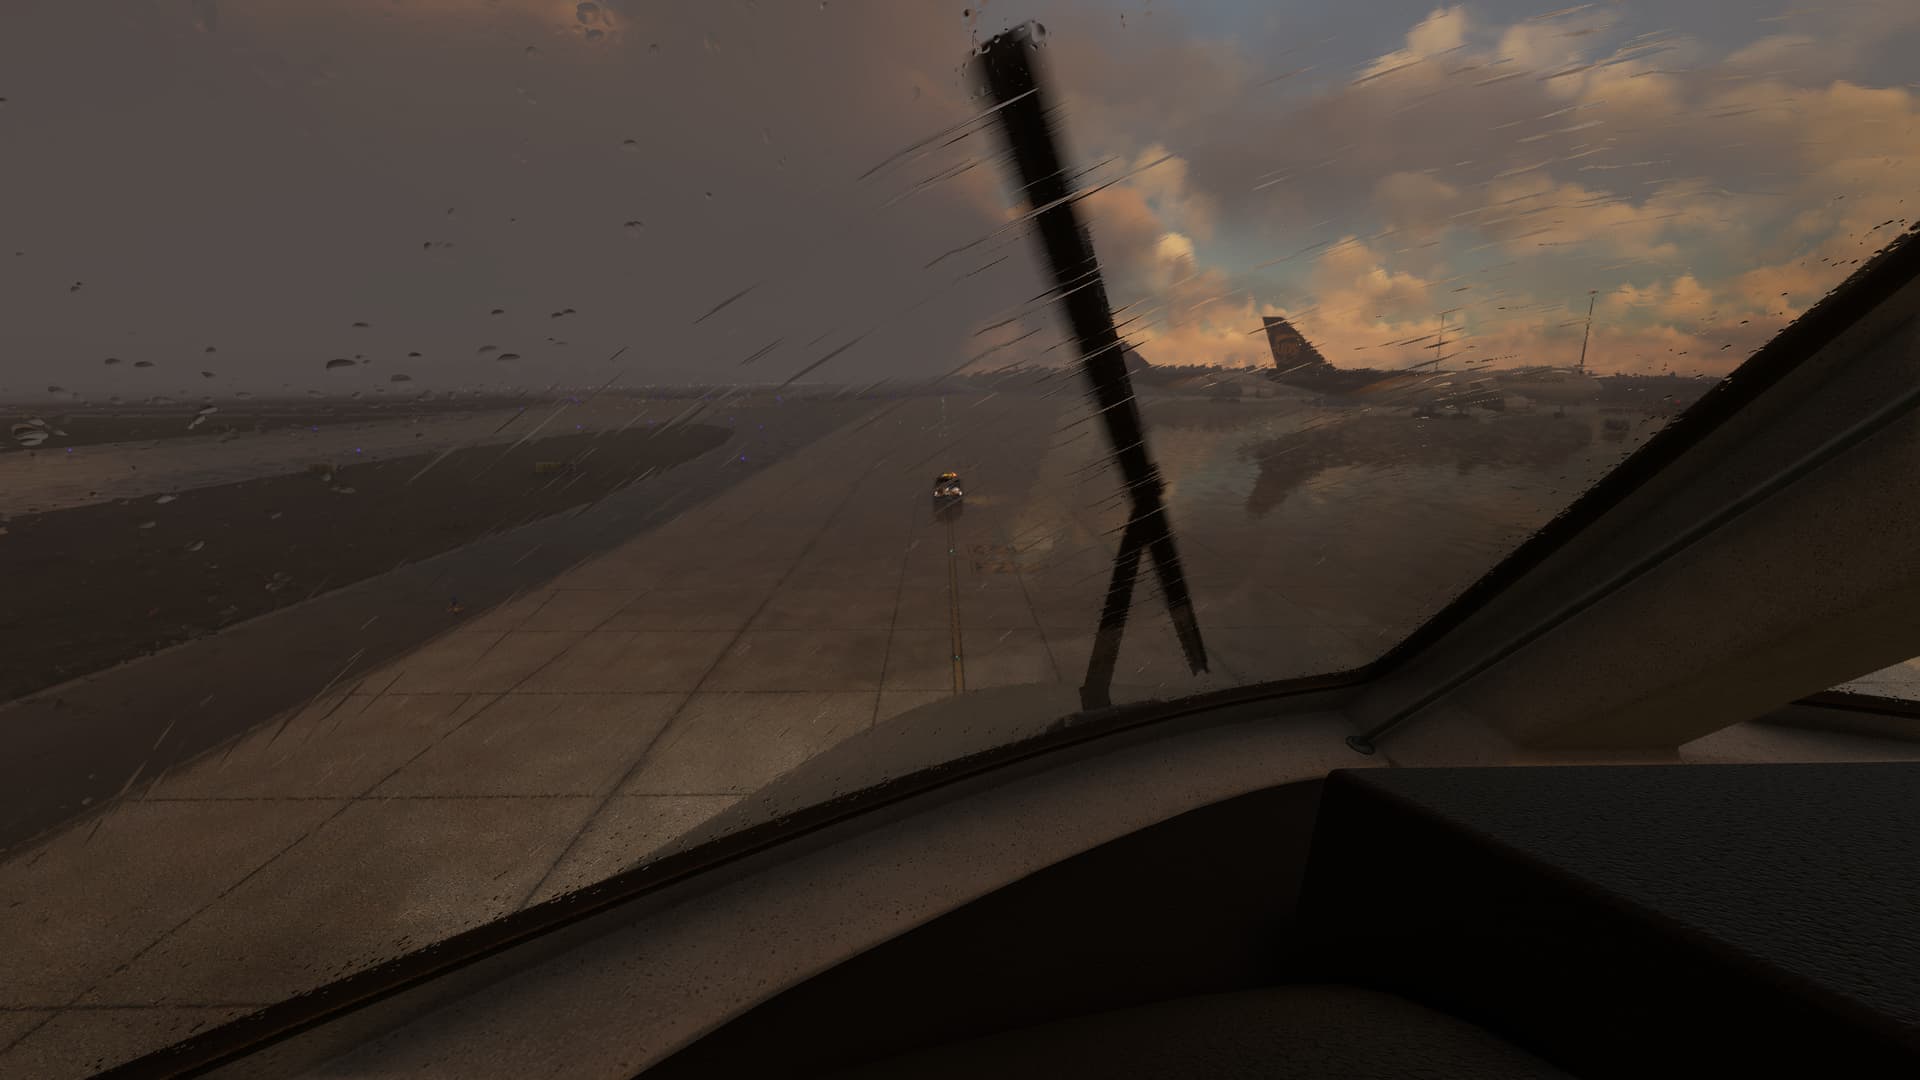 A forward facing view from the glareshield of an airliner, as the window wipers clear rain, and a ground crew vehicle on the apron ahead drives away.